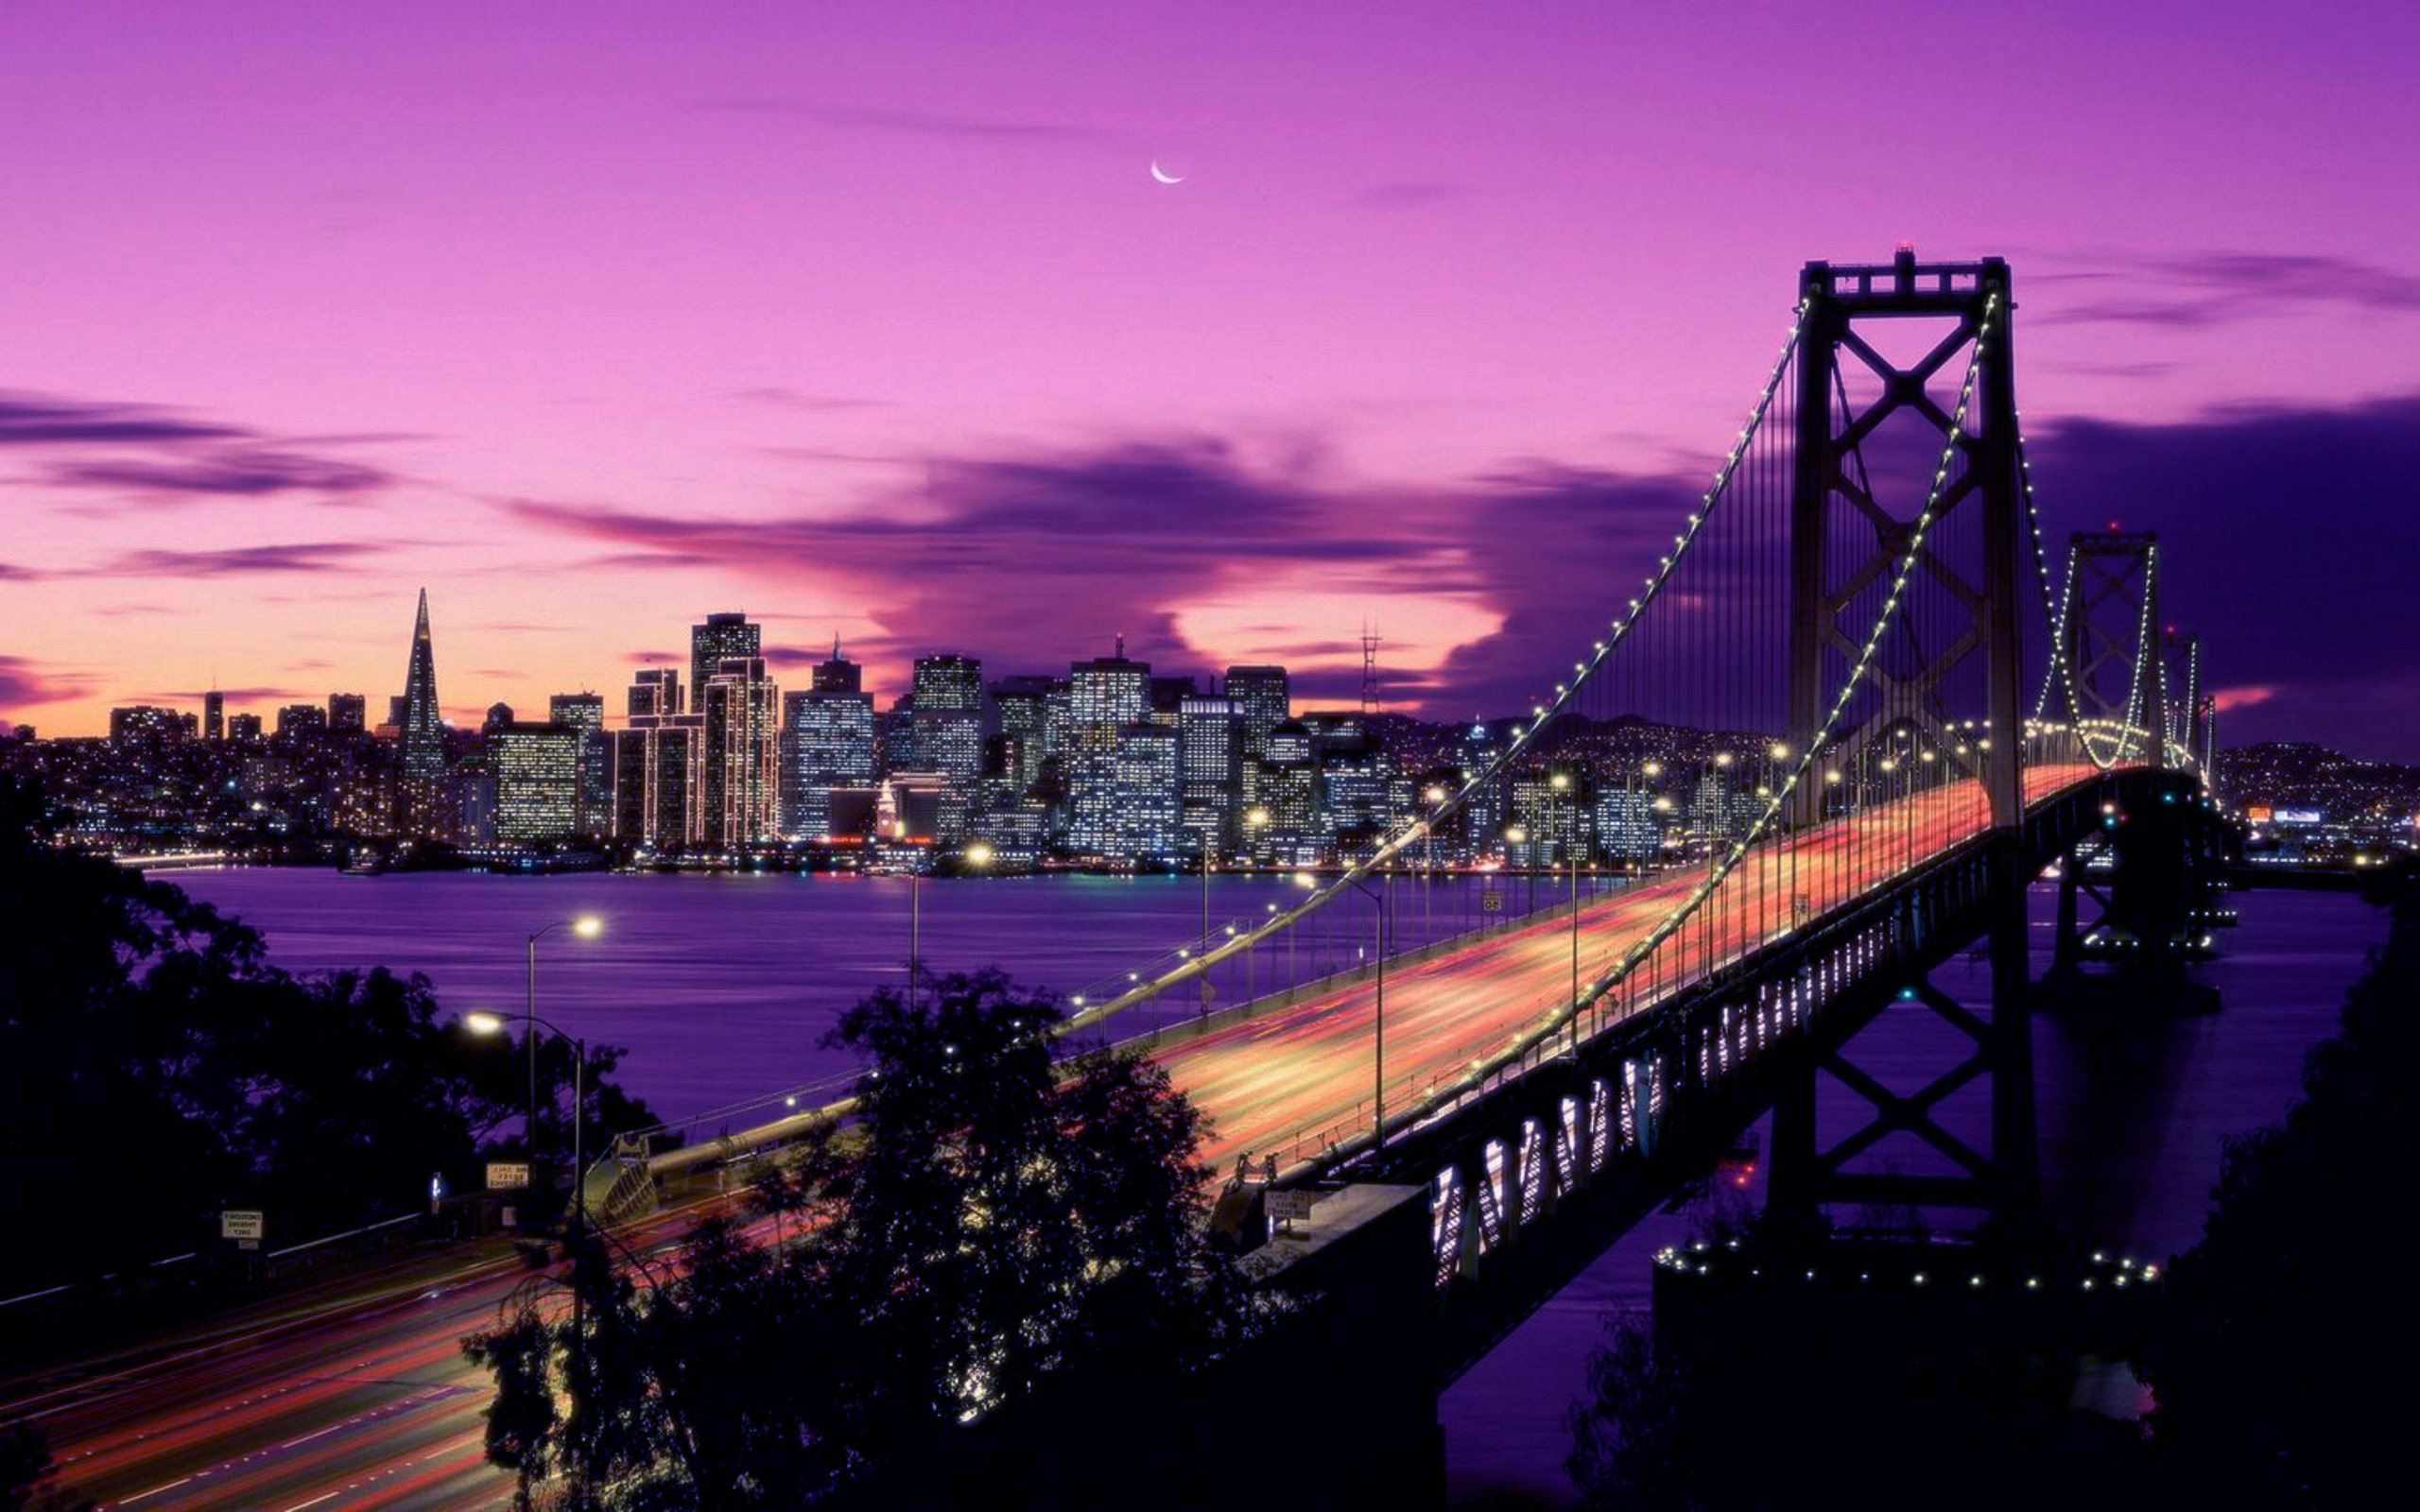 Sunset in San Francisco HD Wallpaper Background Image